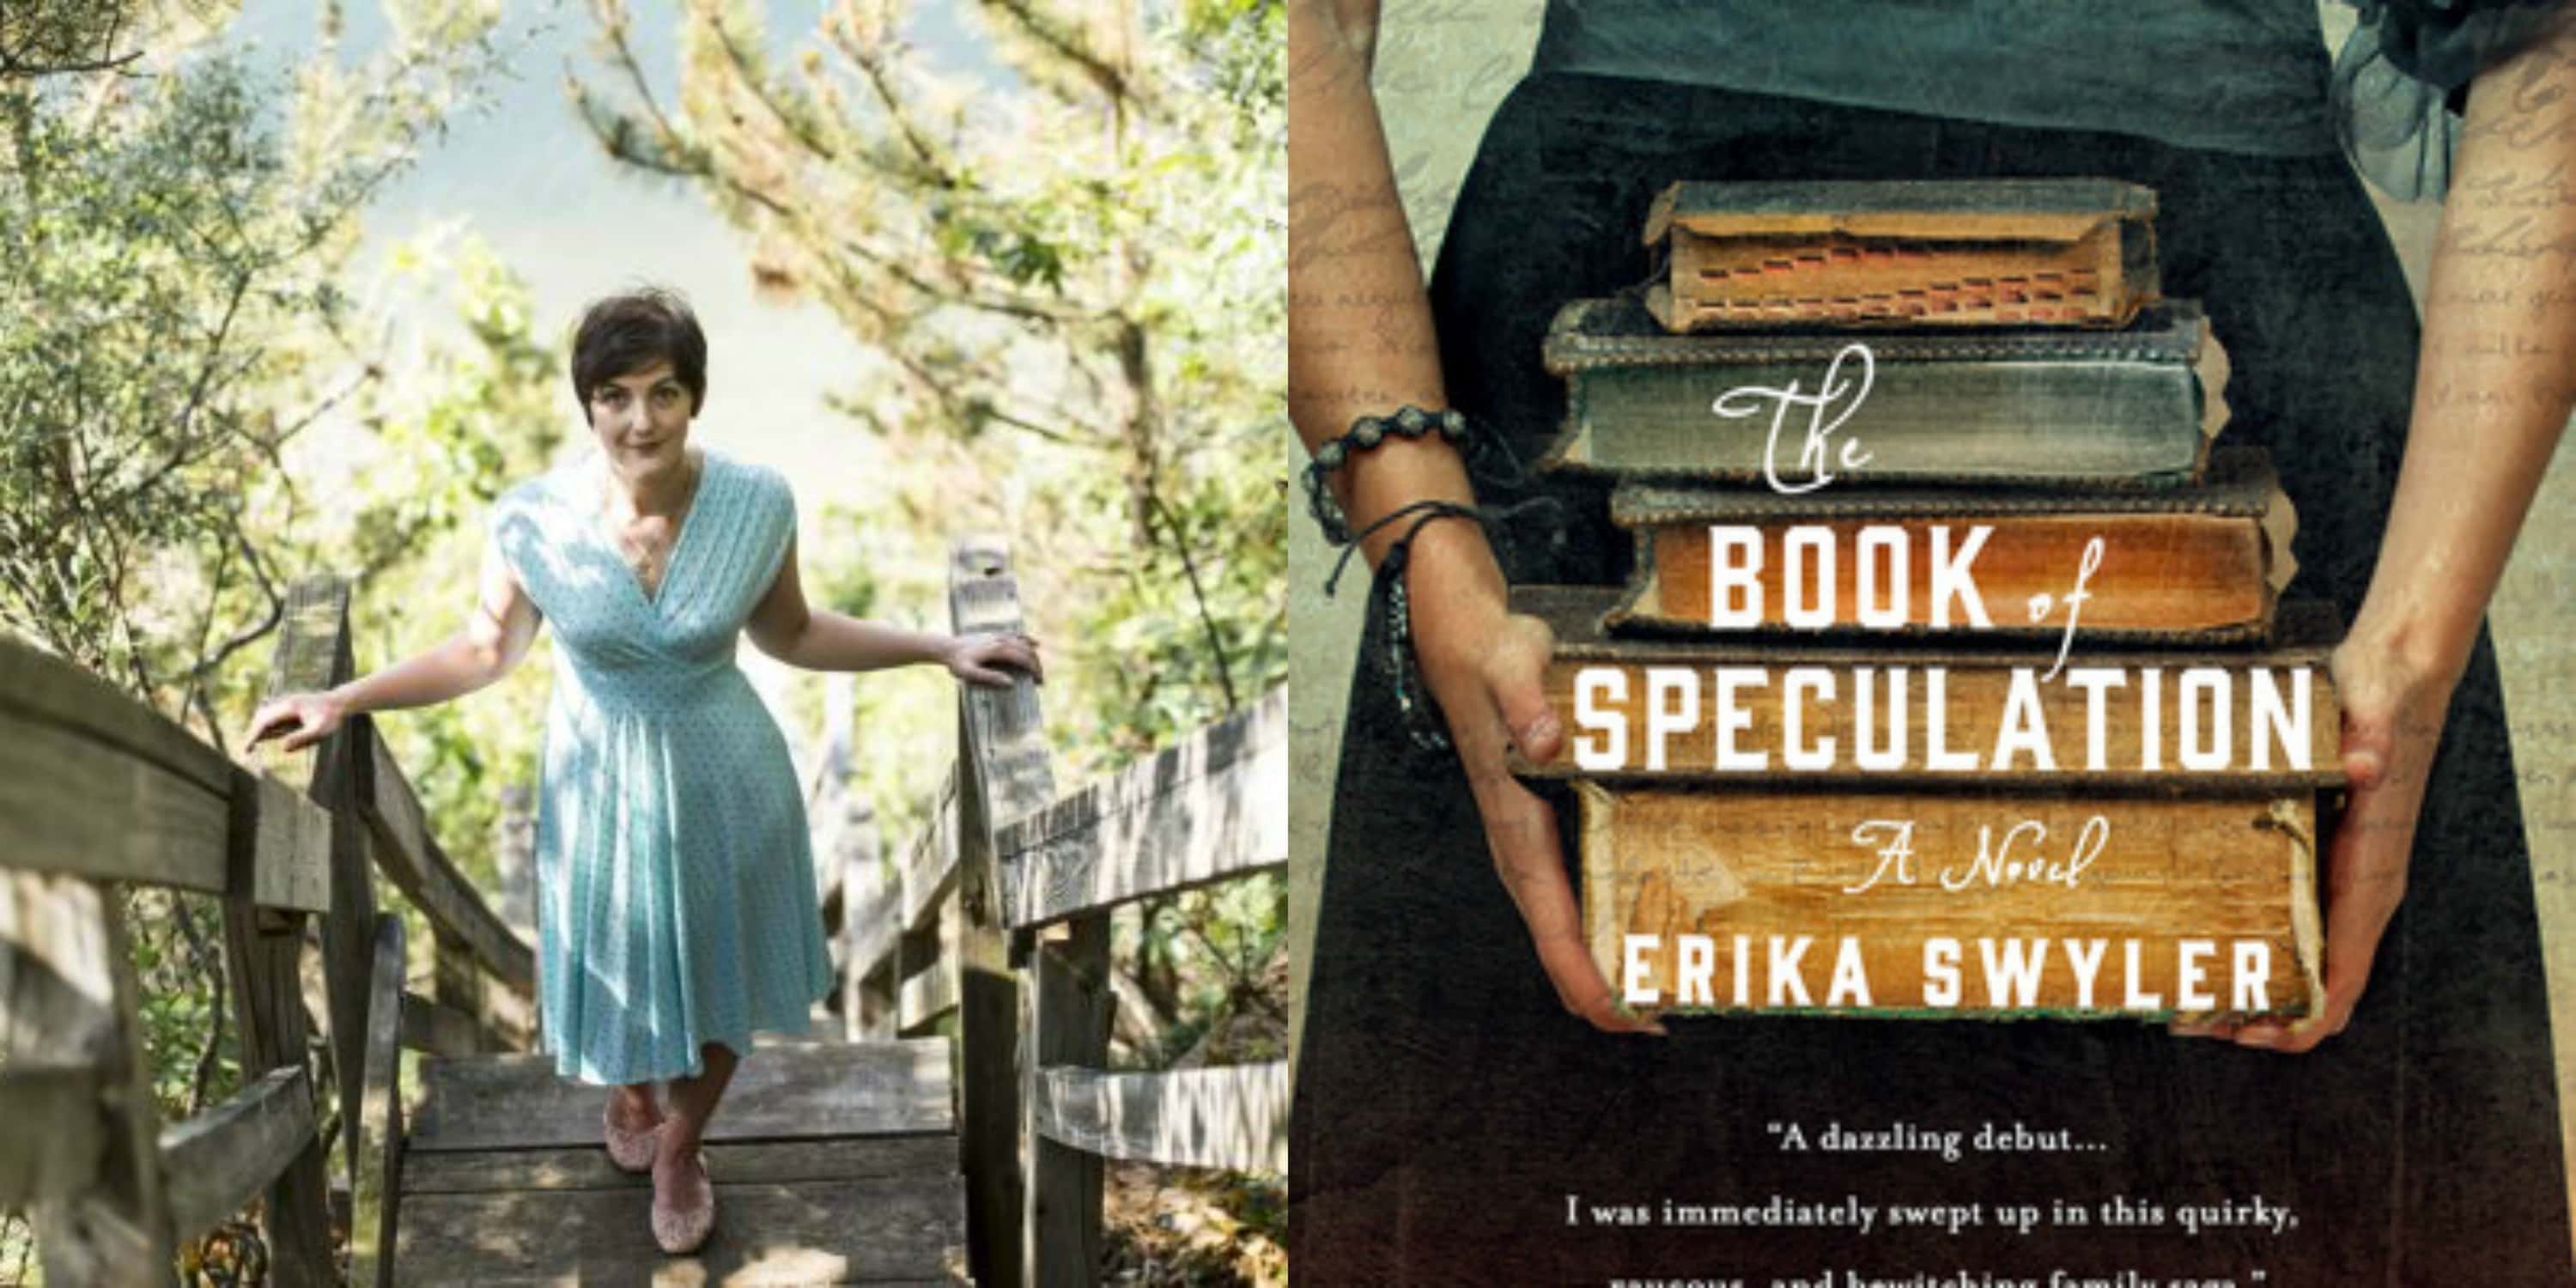 Sundays With Writers: The Book of Speculation by Erika Swyler